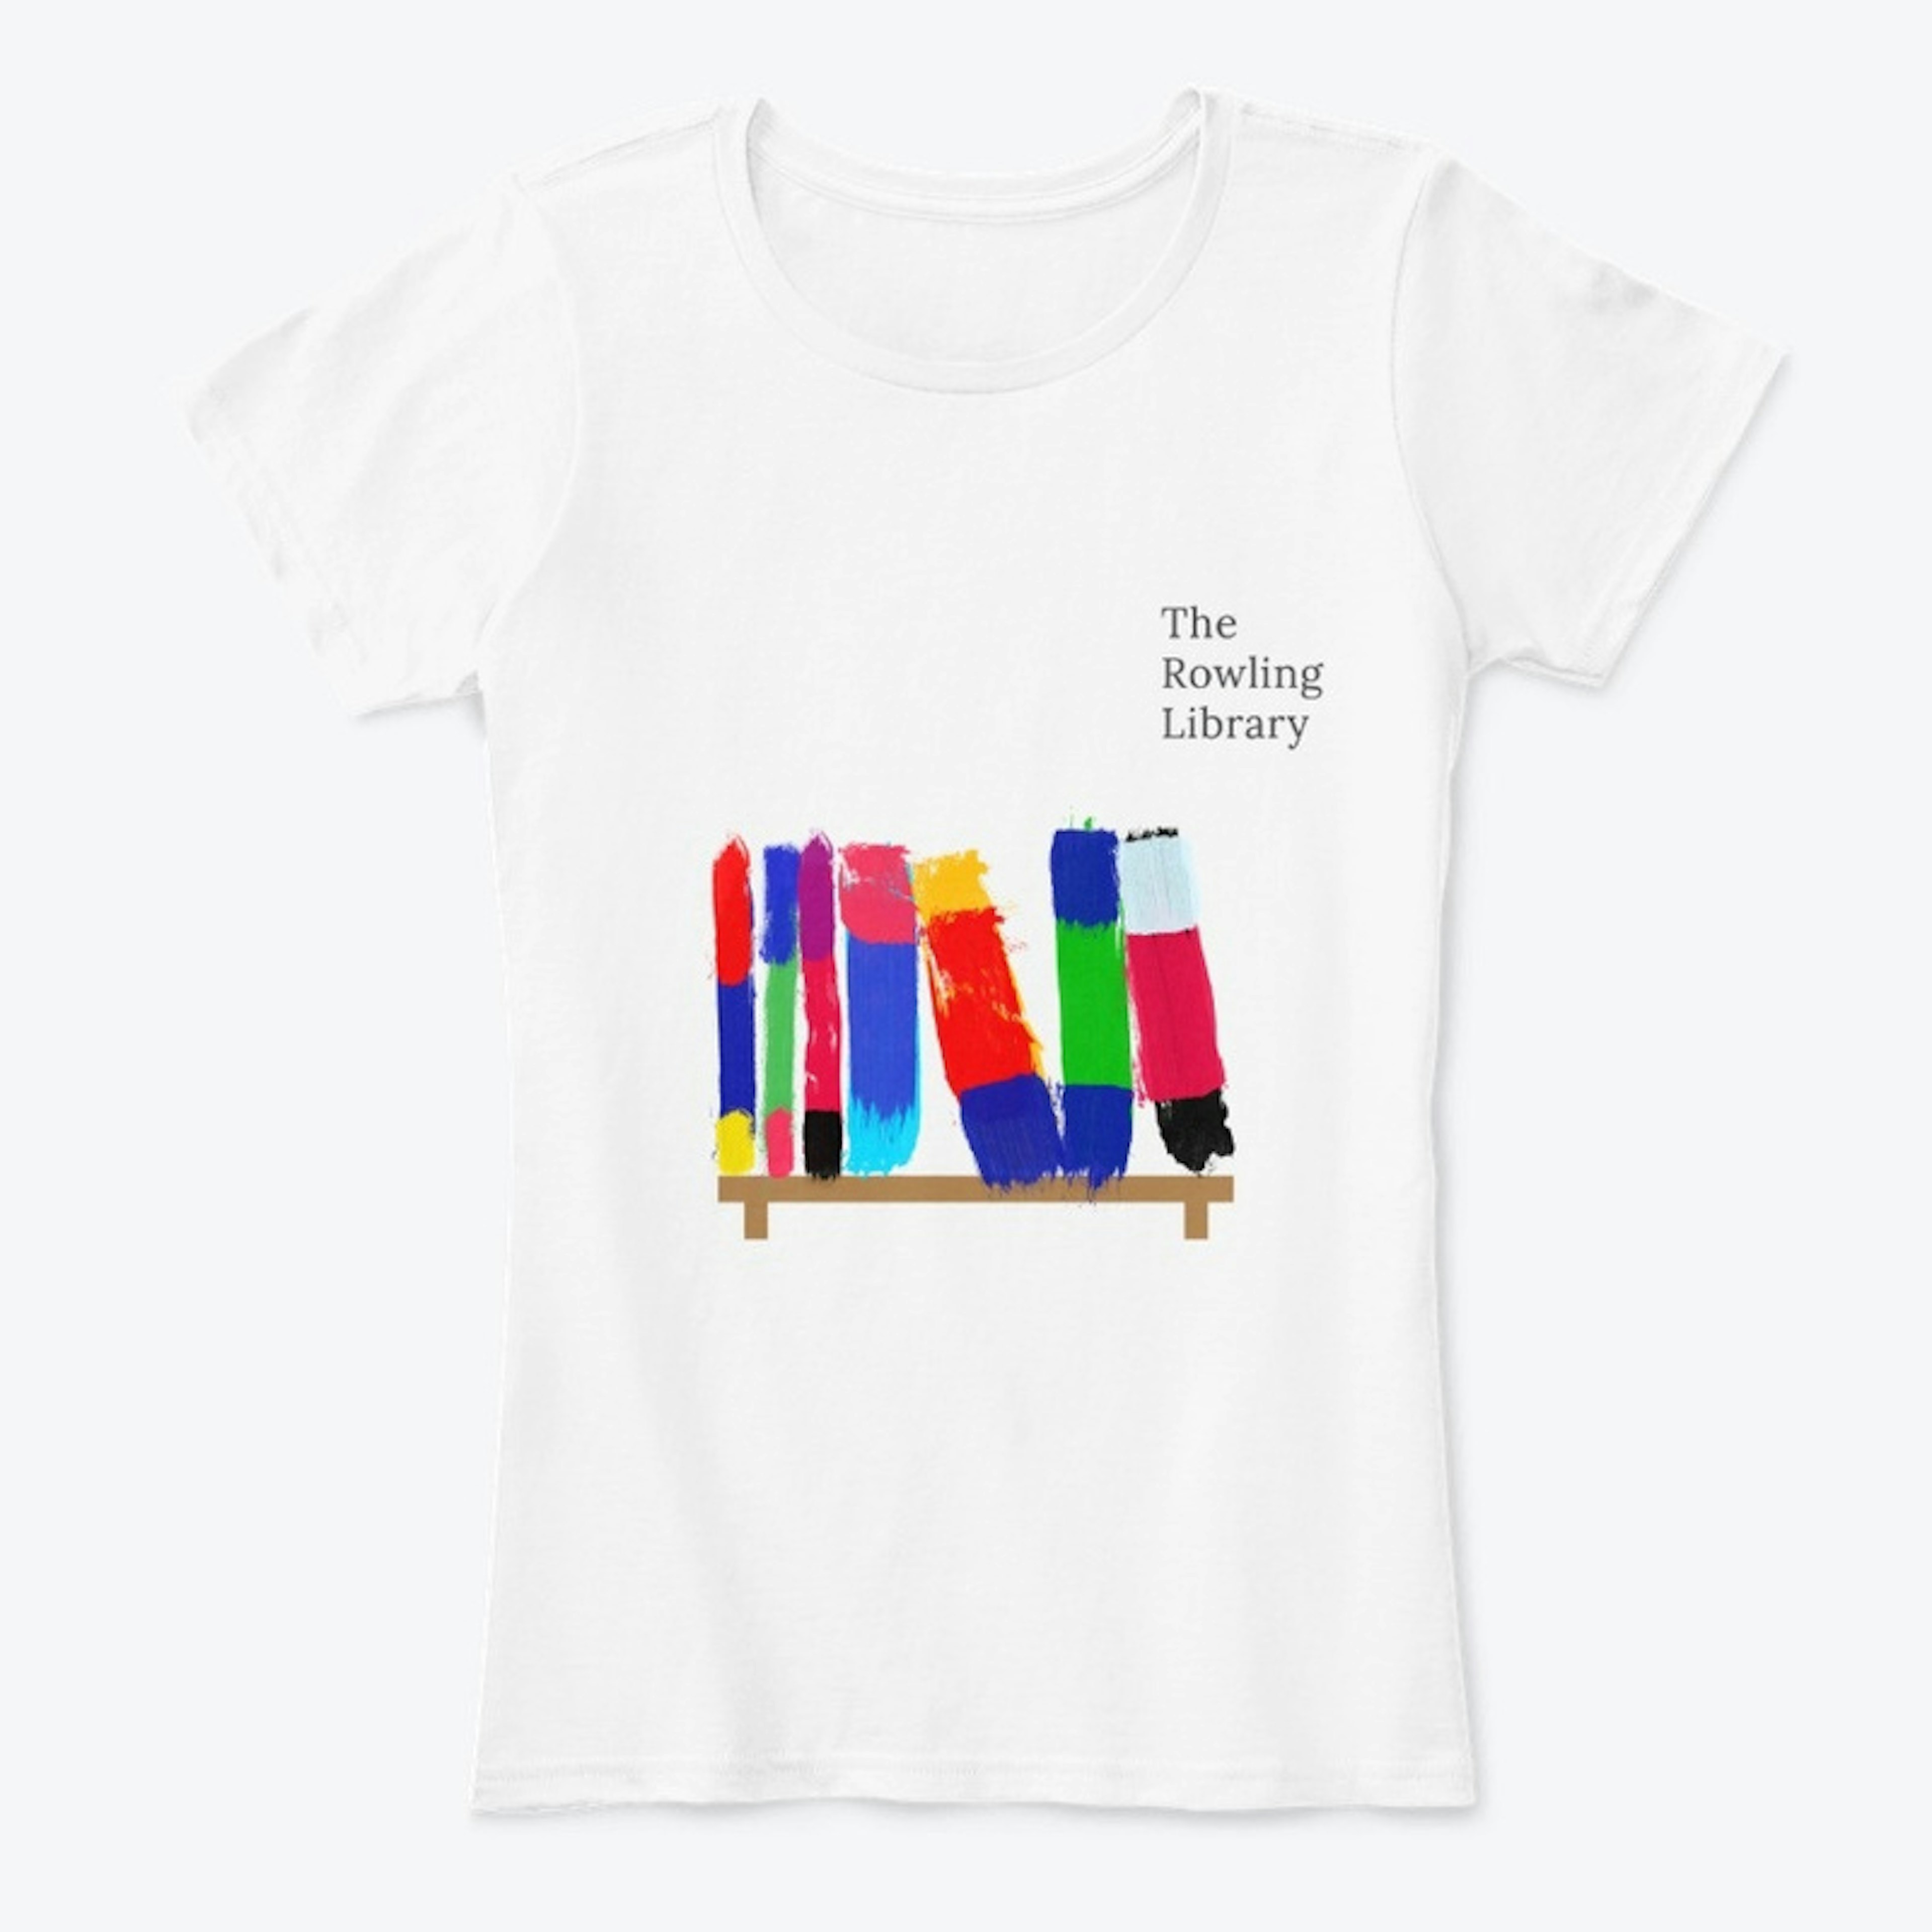 The Rowling Library. Shirt.